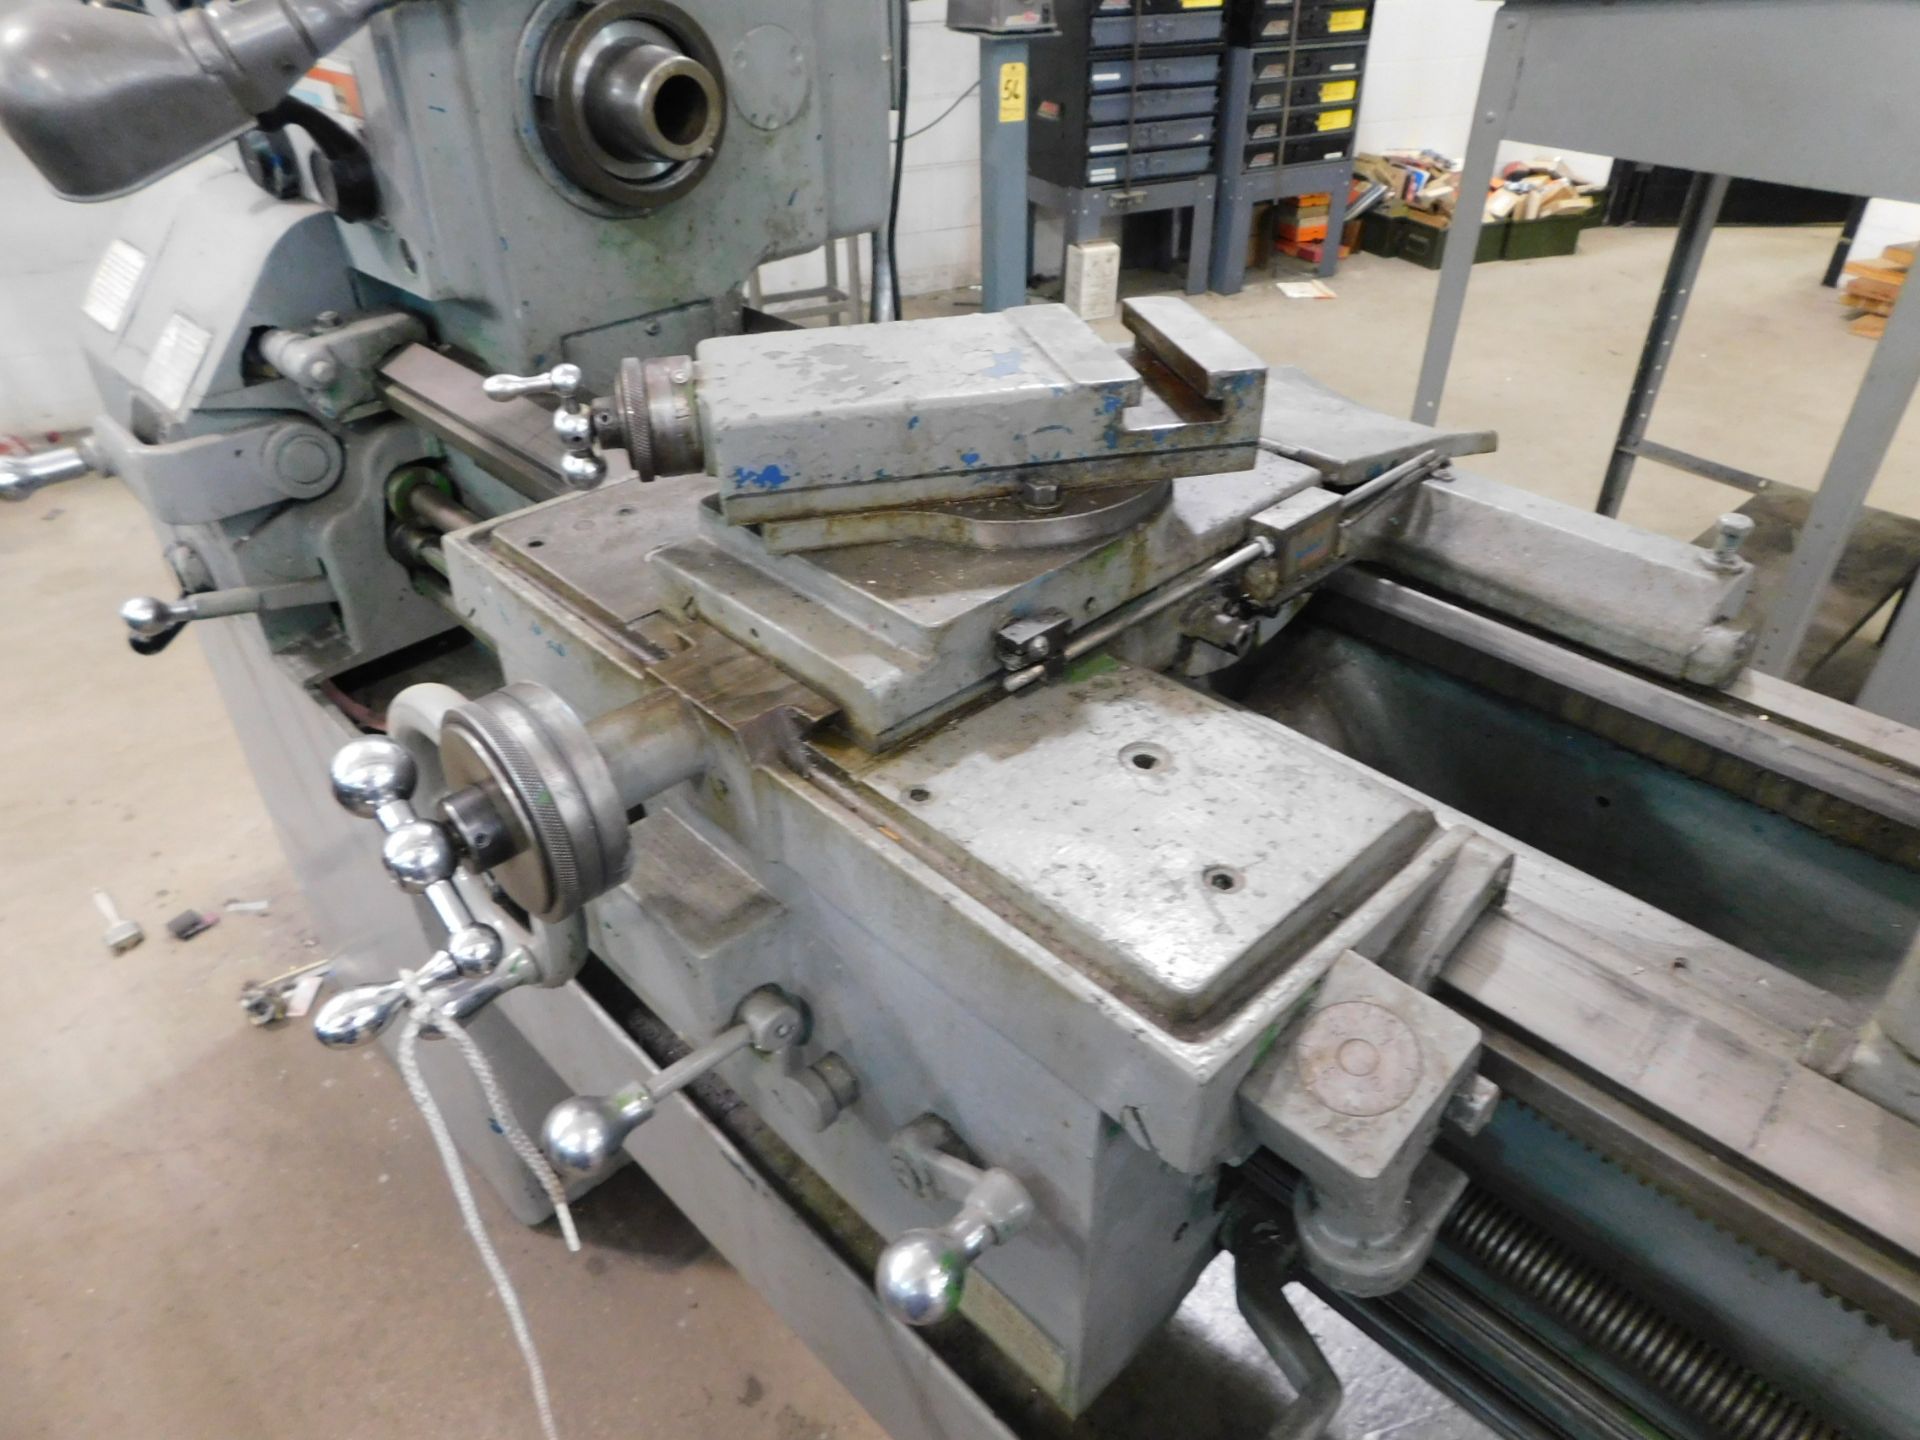 Leblond 16" x 30" Toolroom Lathe, SN 7C2159 with Newall DP7 2-Axis Digital Readout - Image 4 of 11